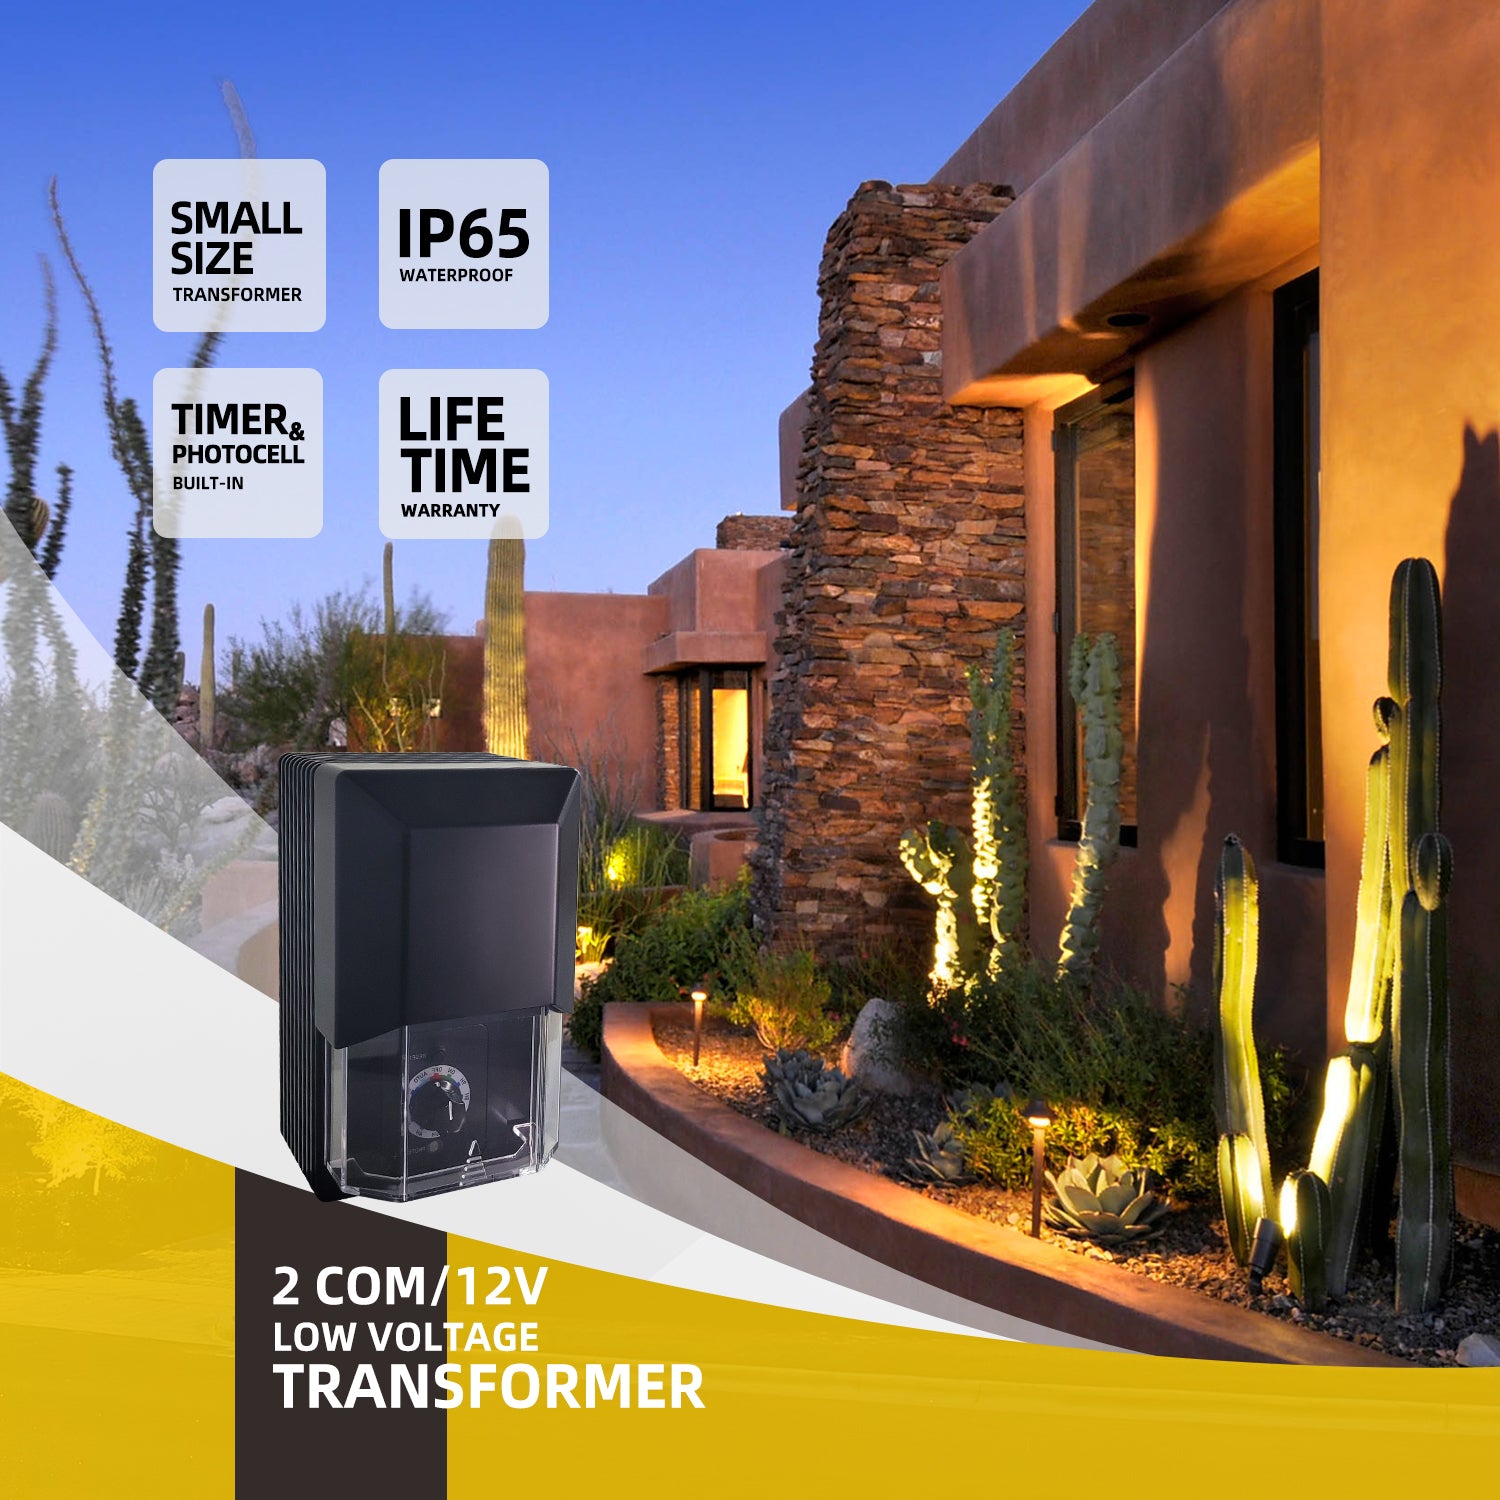 LED landscape lighting setup at dusk with illuminated cacti and architectural features. Highlighted product is the 2COM/12V Low Voltage Transformer, featuring small size, IP65 waterproof rating, built-in timer and photocell, and lifetime warranty.